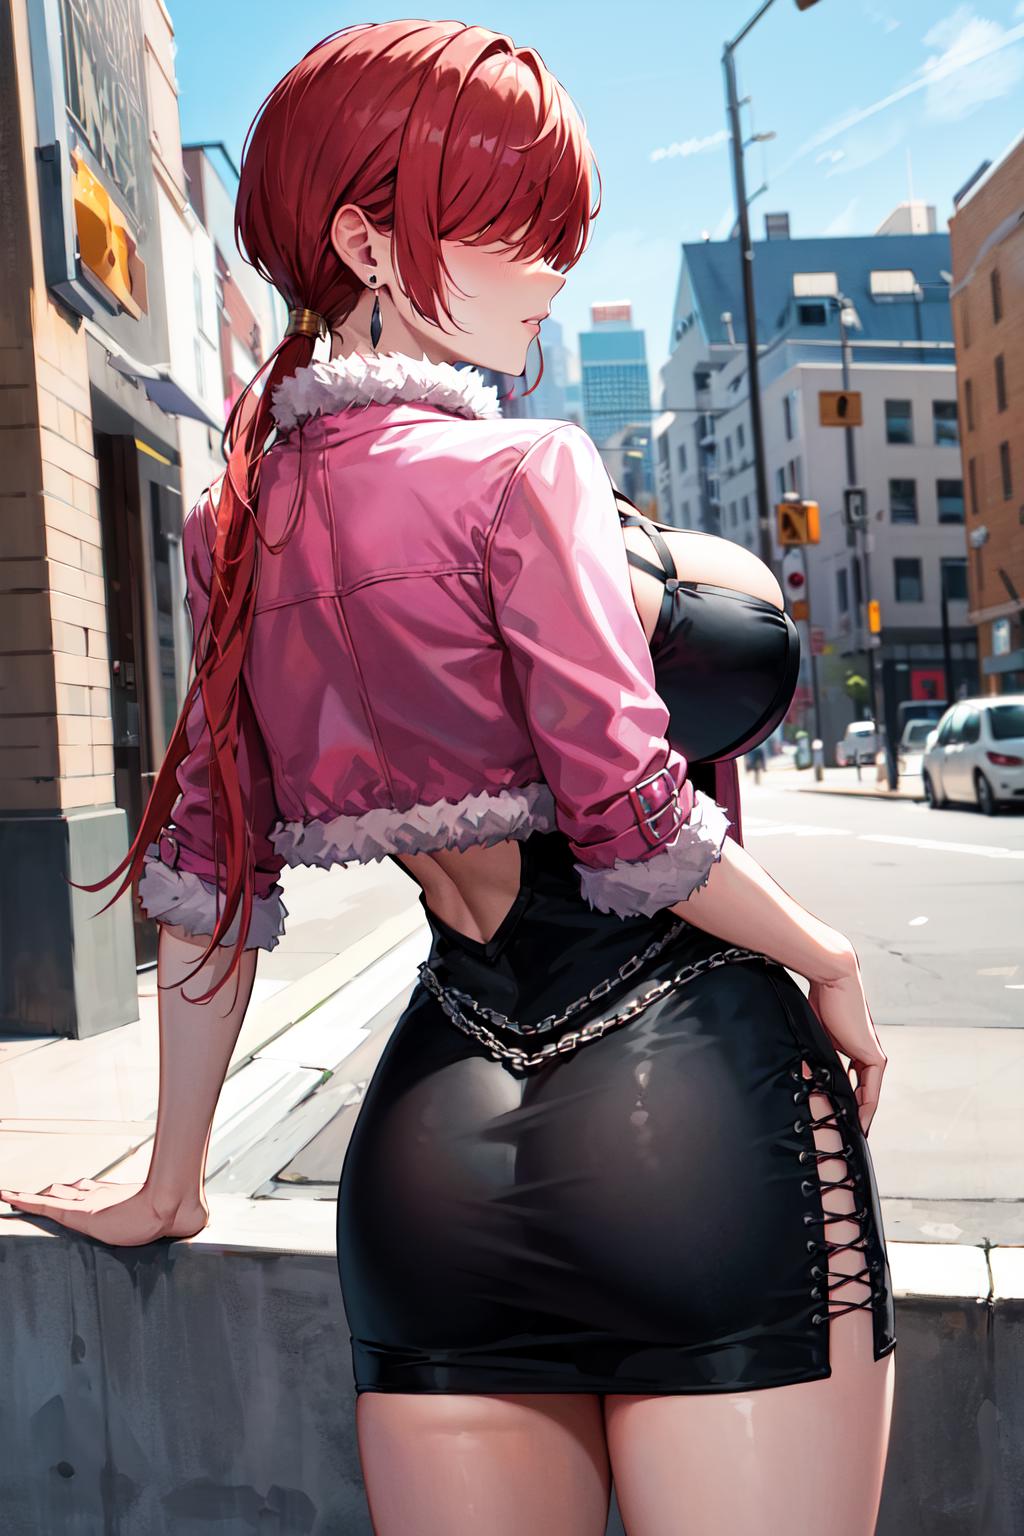 Shermie シェルミー / The King of Fighters image by h_madoka